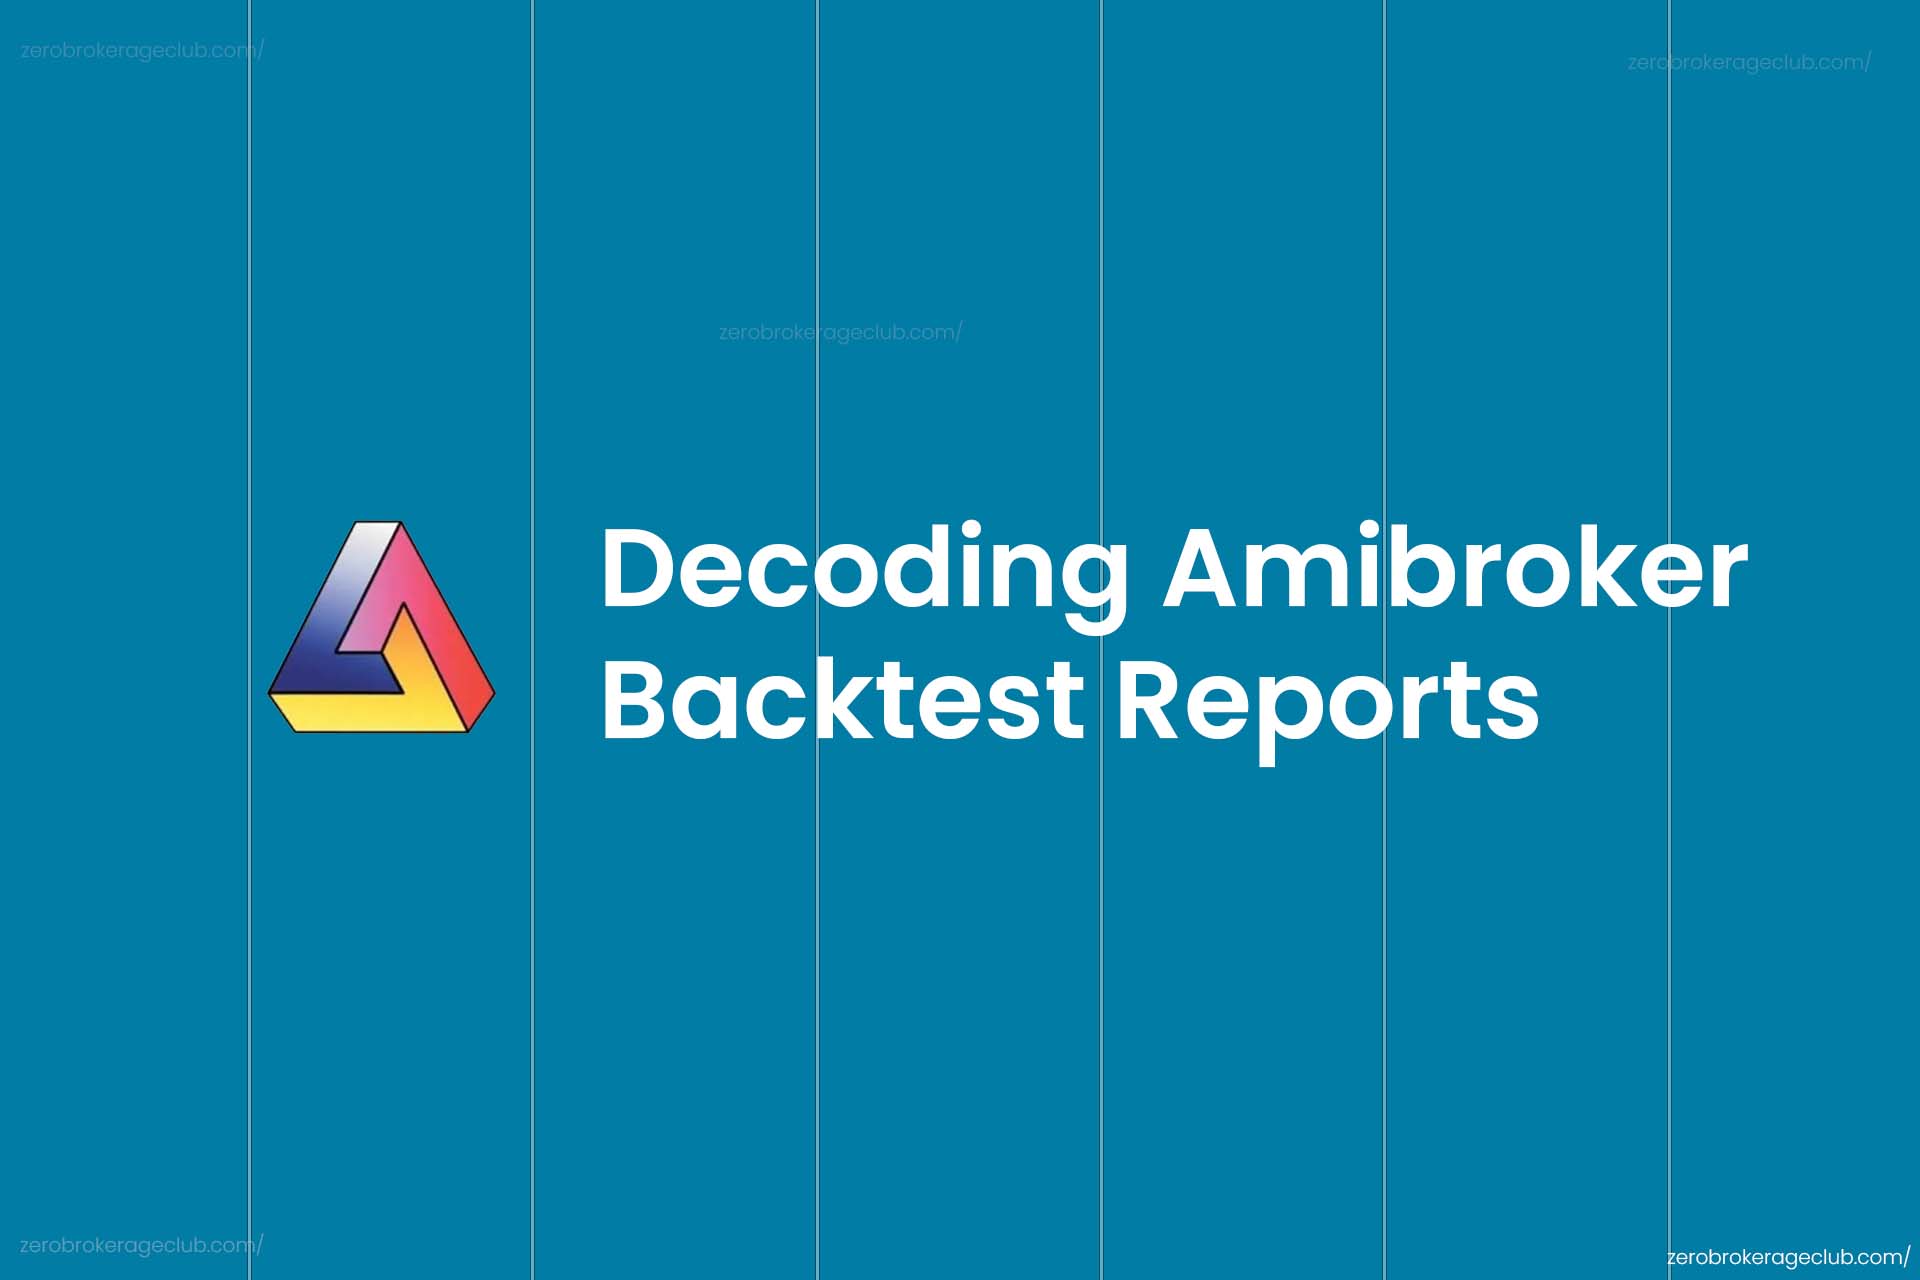 Decoding Amibroker Backtest Reports